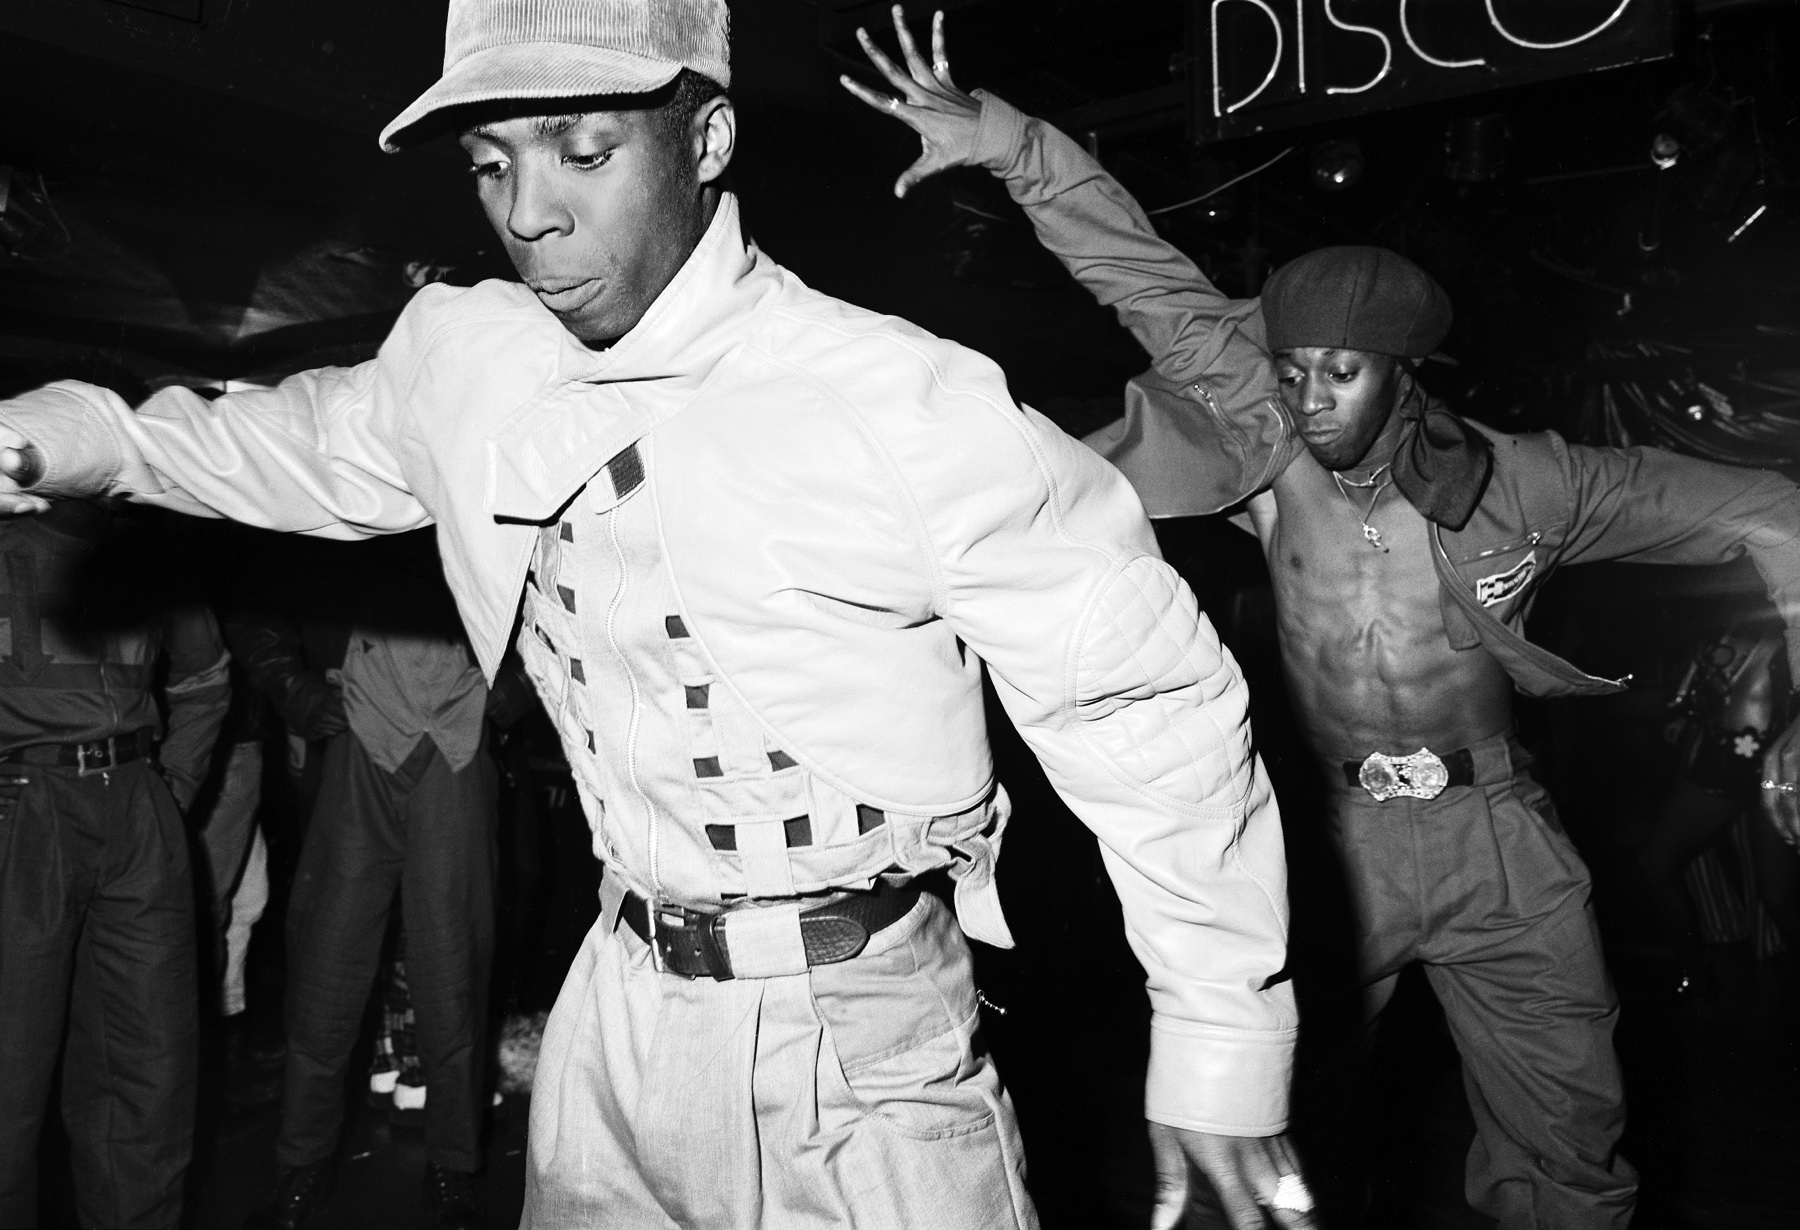 Funky town: How disco fever in the late '70s changed Hong Kong's